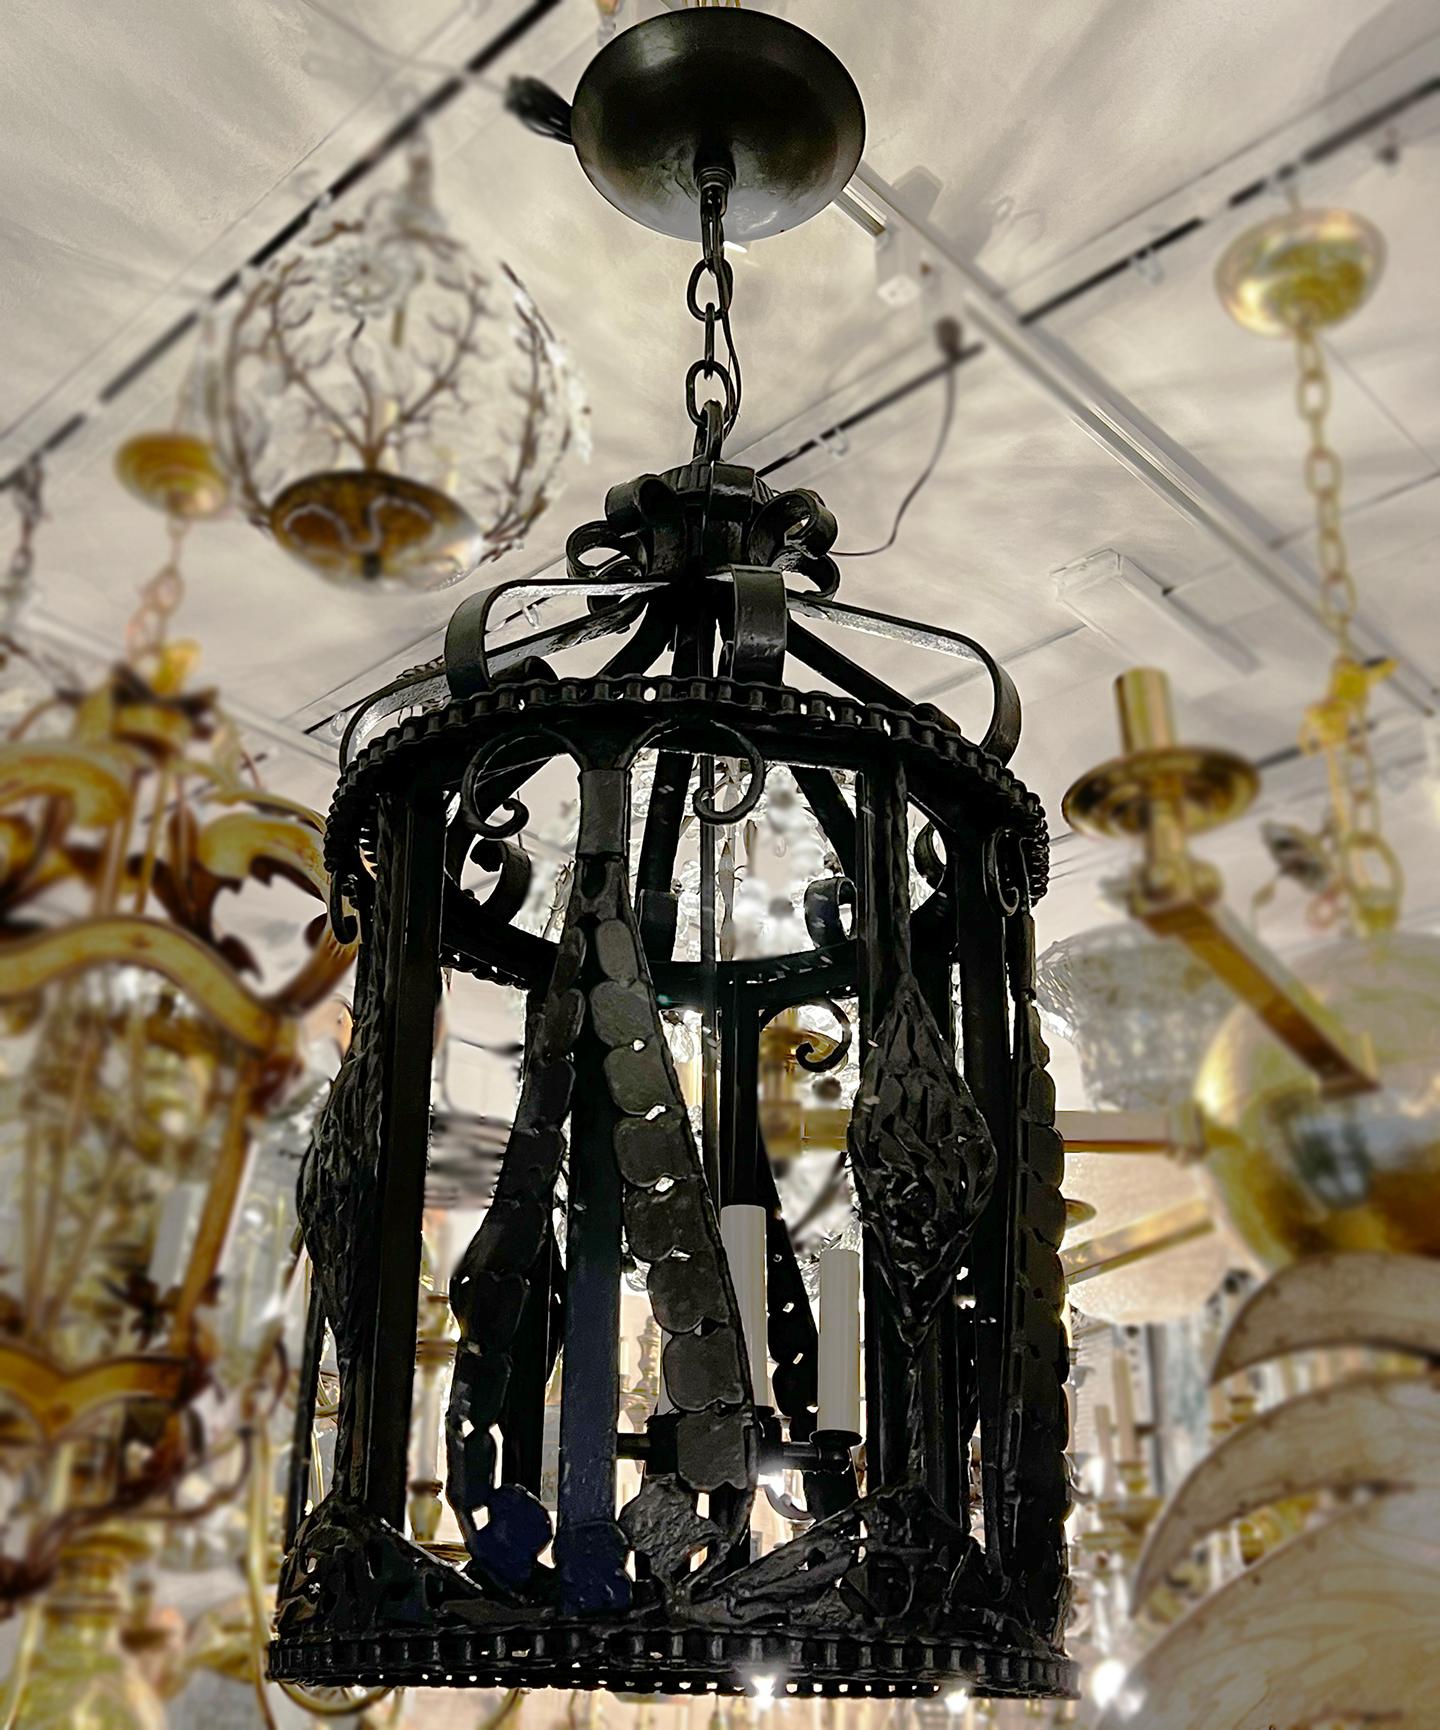 A circa 1920 French wrought iron lantern with 4 lights. Sold individually.

Measurements:
Min. Drop: 33